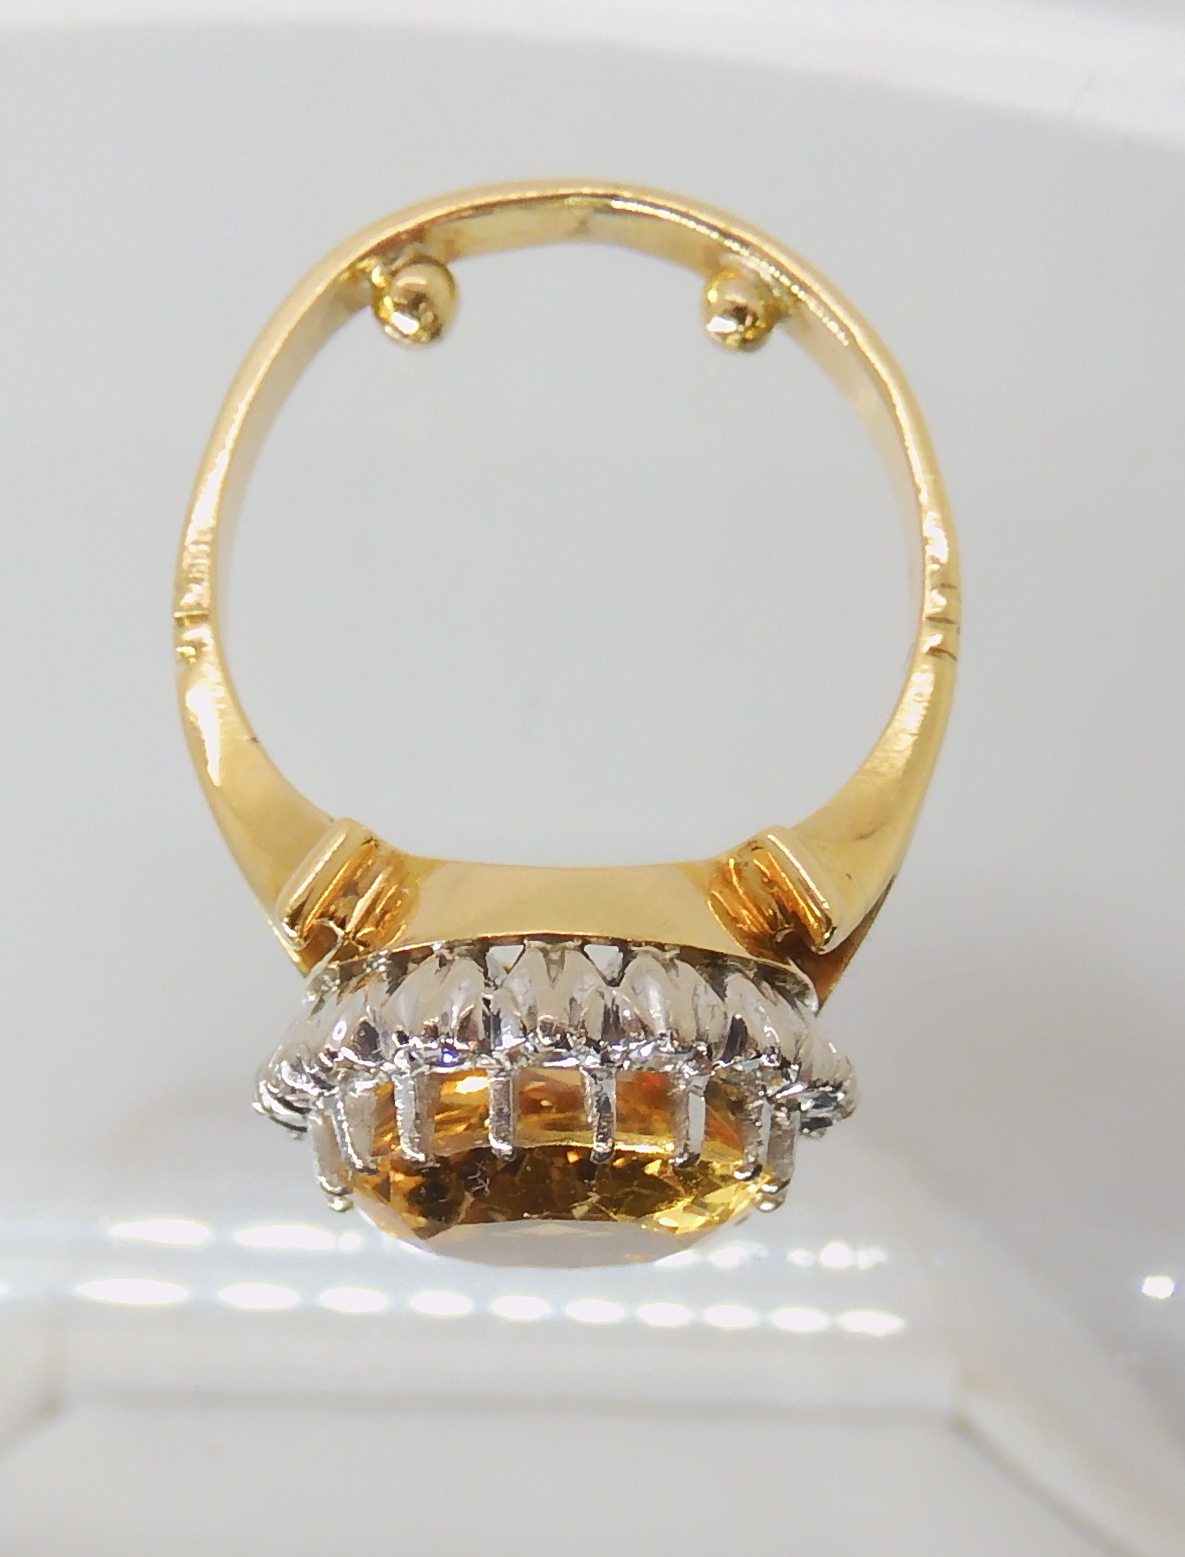 A bright yellow metal ring set with a yellow topaz surrounded with a ring of eight cut diamonds, - Image 3 of 4